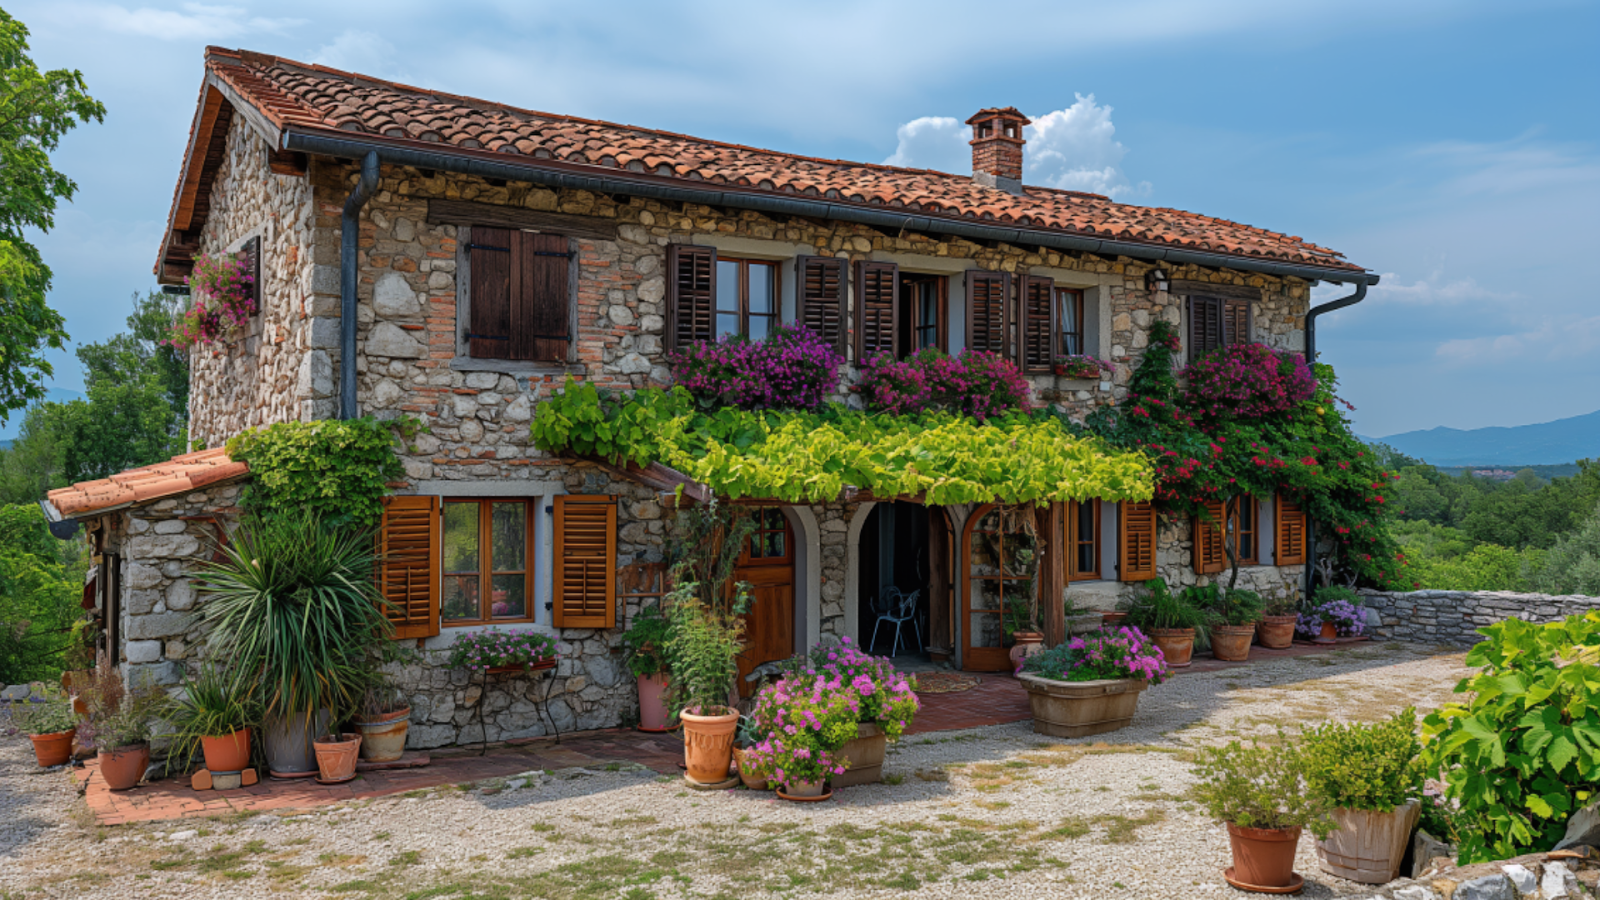 A charming farmhouse surrounded by vineyards in Istria.